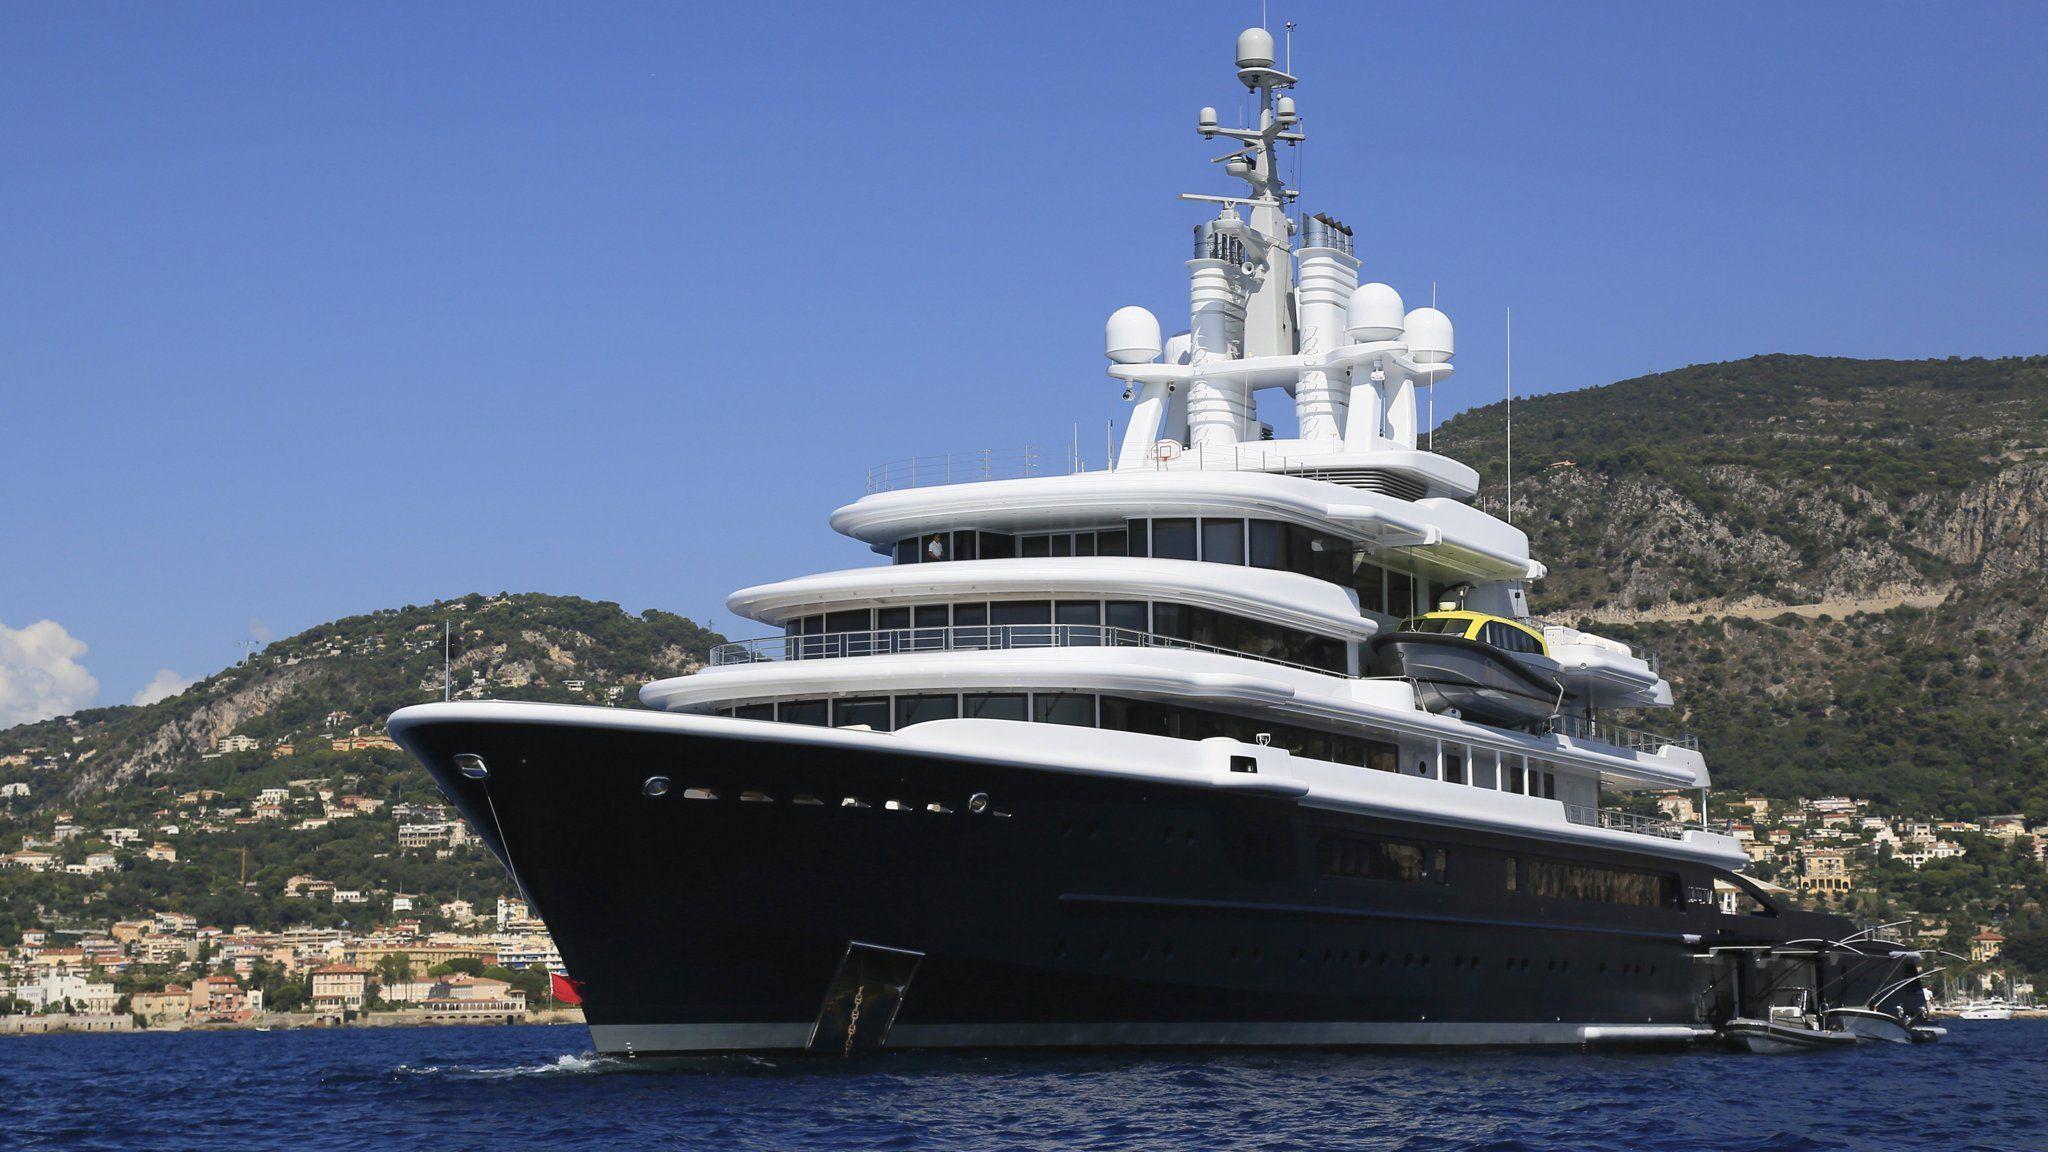 Russian billionaire’s superyacht given to former wife in divorce